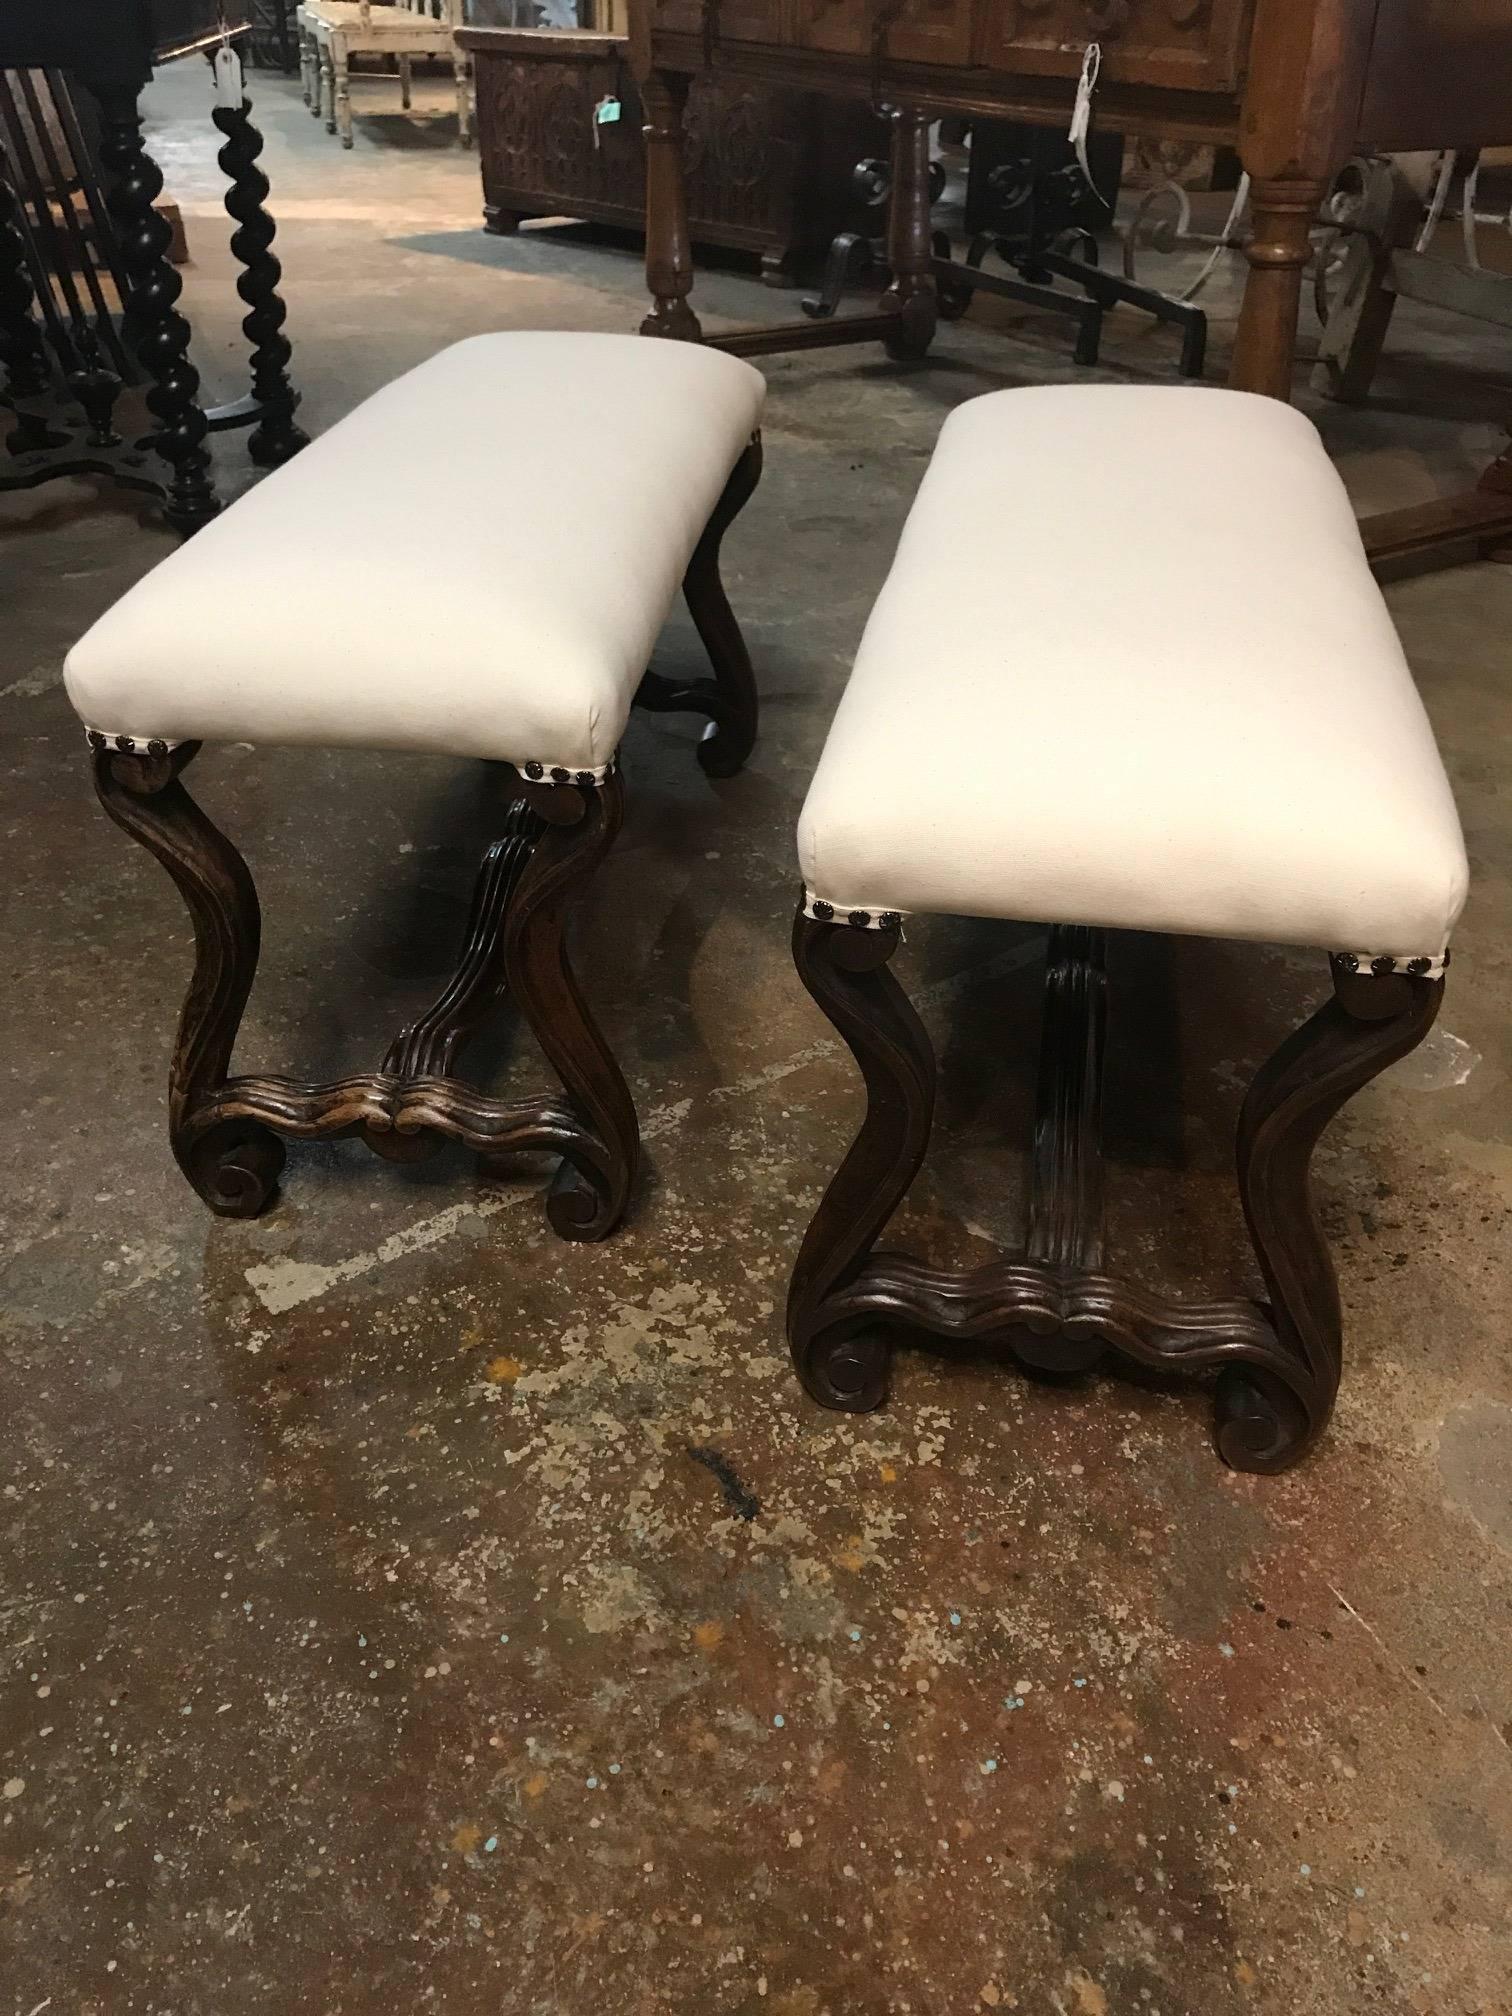 A very charming pair of later 19th century French Louis XIII style benches - banquettes. Beautifully constructed from walnut and recently reupholstered.